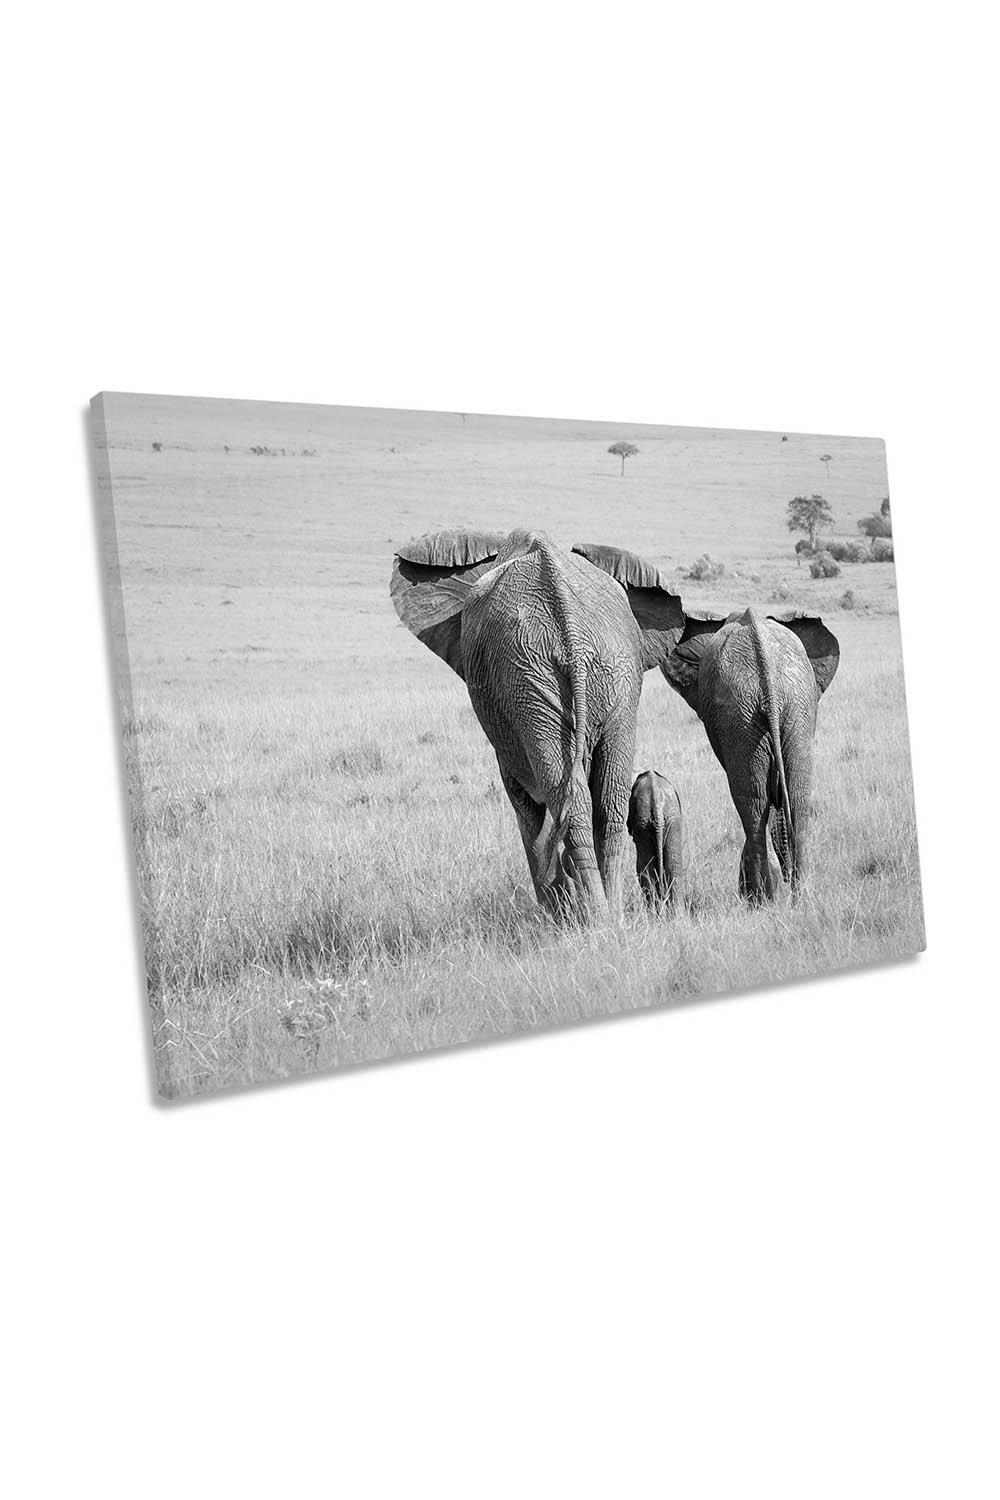 Three Butts Elephant Family Canvas Wall Art Picture Print